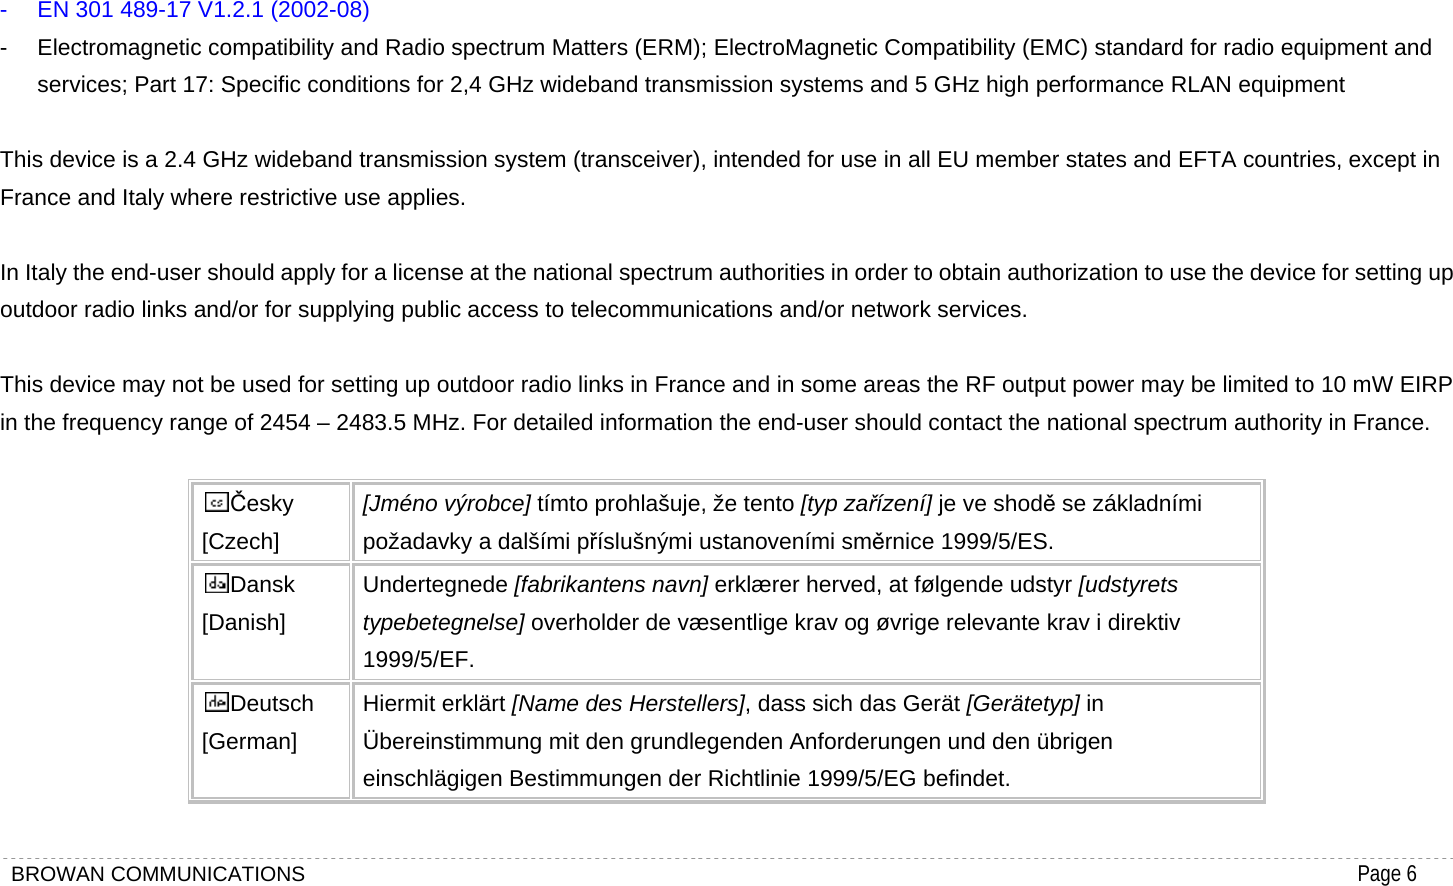 BROWAN COMMUNICATIONS                                                                                           Page 6   -  EN 301 489-17 V1.2.1 (2002-08)   -  Electromagnetic compatibility and Radio spectrum Matters (ERM); ElectroMagnetic Compatibility (EMC) standard for radio equipment and services; Part 17: Specific conditions for 2,4 GHz wideband transmission systems and 5 GHz high performance RLAN equipment  This device is a 2.4 GHz wideband transmission system (transceiver), intended for use in all EU member states and EFTA countries, except in France and Italy where restrictive use applies.  In Italy the end-user should apply for a license at the national spectrum authorities in order to obtain authorization to use the device for setting up outdoor radio links and/or for supplying public access to telecommunications and/or network services.  This device may not be used for setting up outdoor radio links in France and in some areas the RF output power may be limited to 10 mW EIRP in the frequency range of 2454 – 2483.5 MHz. For detailed information the end-user should contact the national spectrum authority in France.  Česky [Czech] [Jméno výrobce] tímto prohlašuje, že tento [typ zařízení] je ve shodě se základními požadavky a dalšími příslušnými ustanoveními směrnice 1999/5/ES. Dansk [Danish] Undertegnede [fabrikantens navn] erklærer herved, at følgende udstyr [udstyrets typebetegnelse] overholder de væsentlige krav og øvrige relevante krav i direktiv 1999/5/EF. Deutsch [German] Hiermit erklärt [Name des Herstellers], dass sich das Gerät [Gerätetyp] in Übereinstimmung mit den grundlegenden Anforderungen und den übrigen einschlägigen Bestimmungen der Richtlinie 1999/5/EG befindet. 